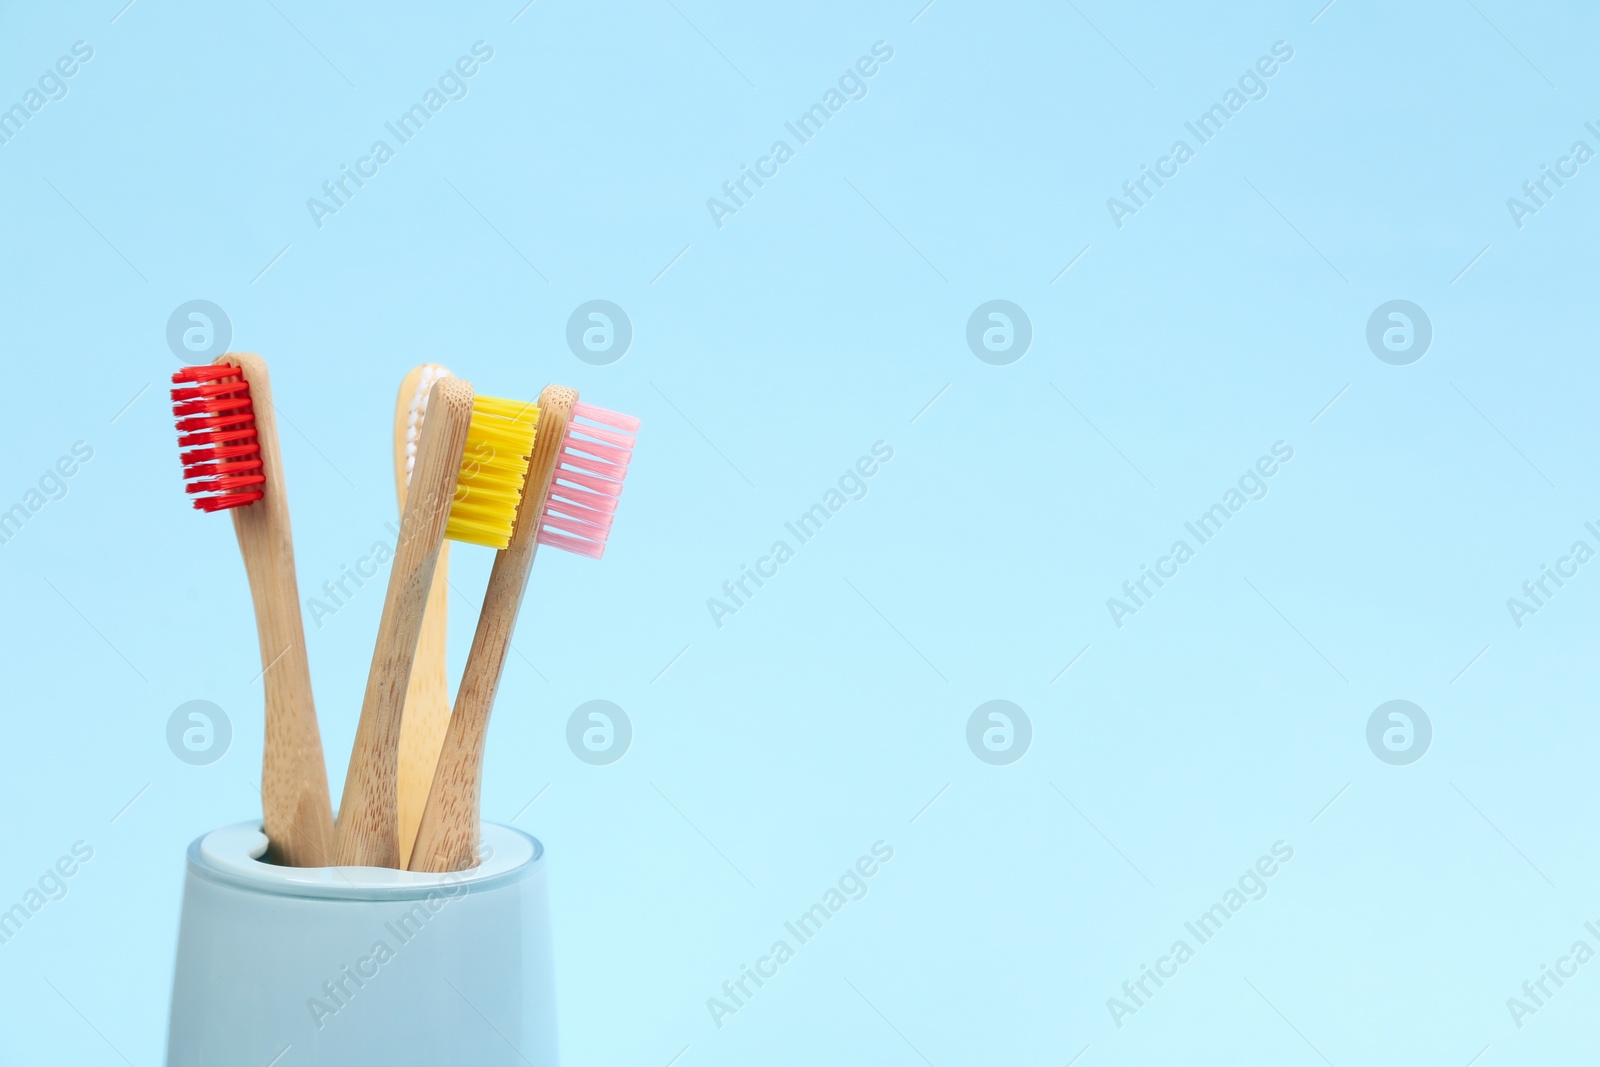 Photo of Toothbrushes made of bamboo in holder on light blue background. Space for text